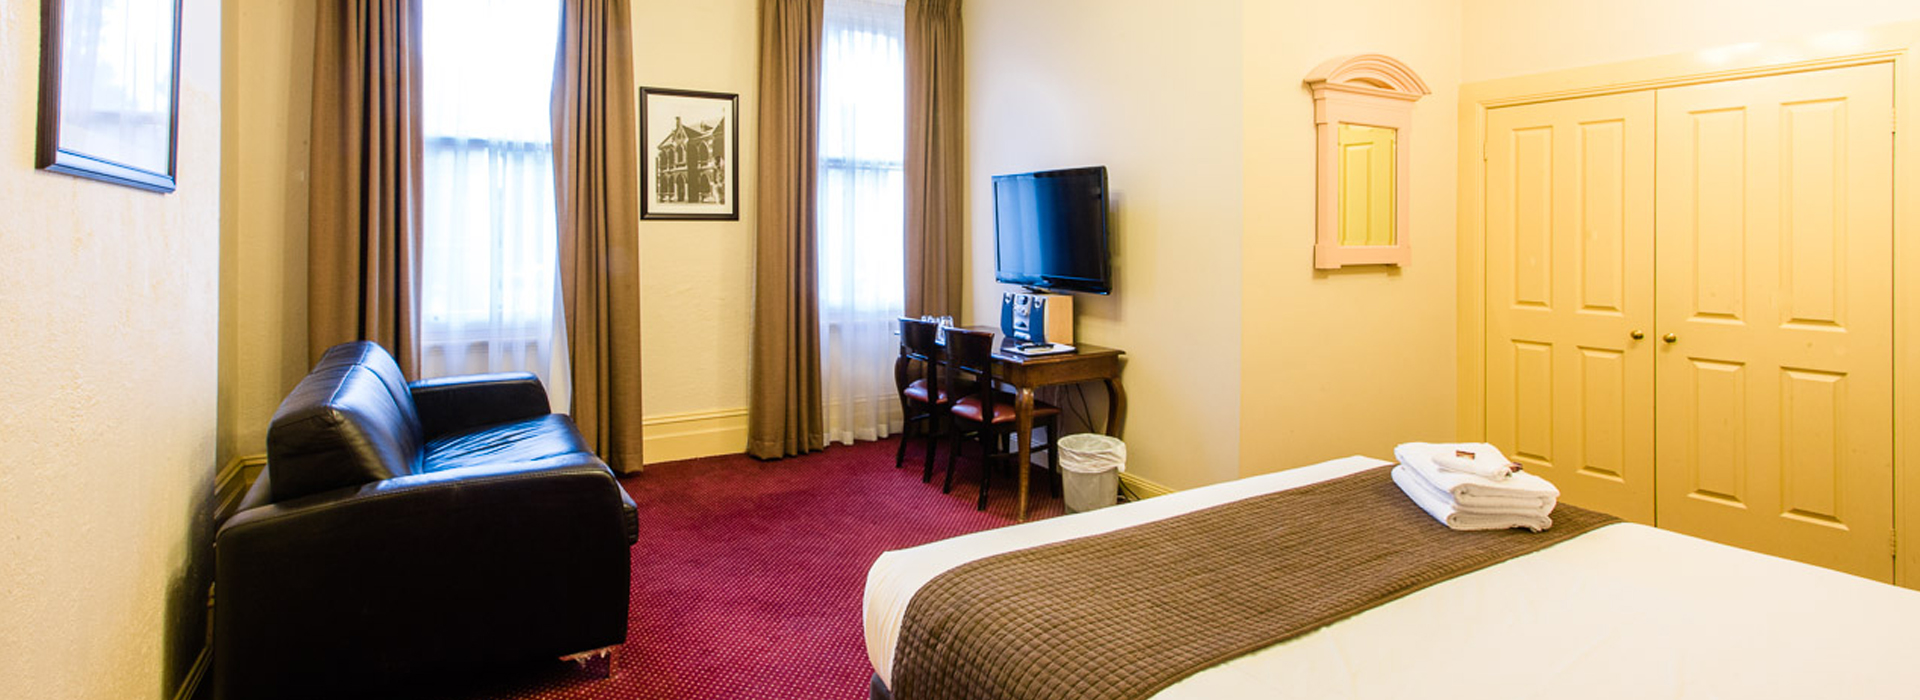 accommodation at glenferrie hotel hawthorn